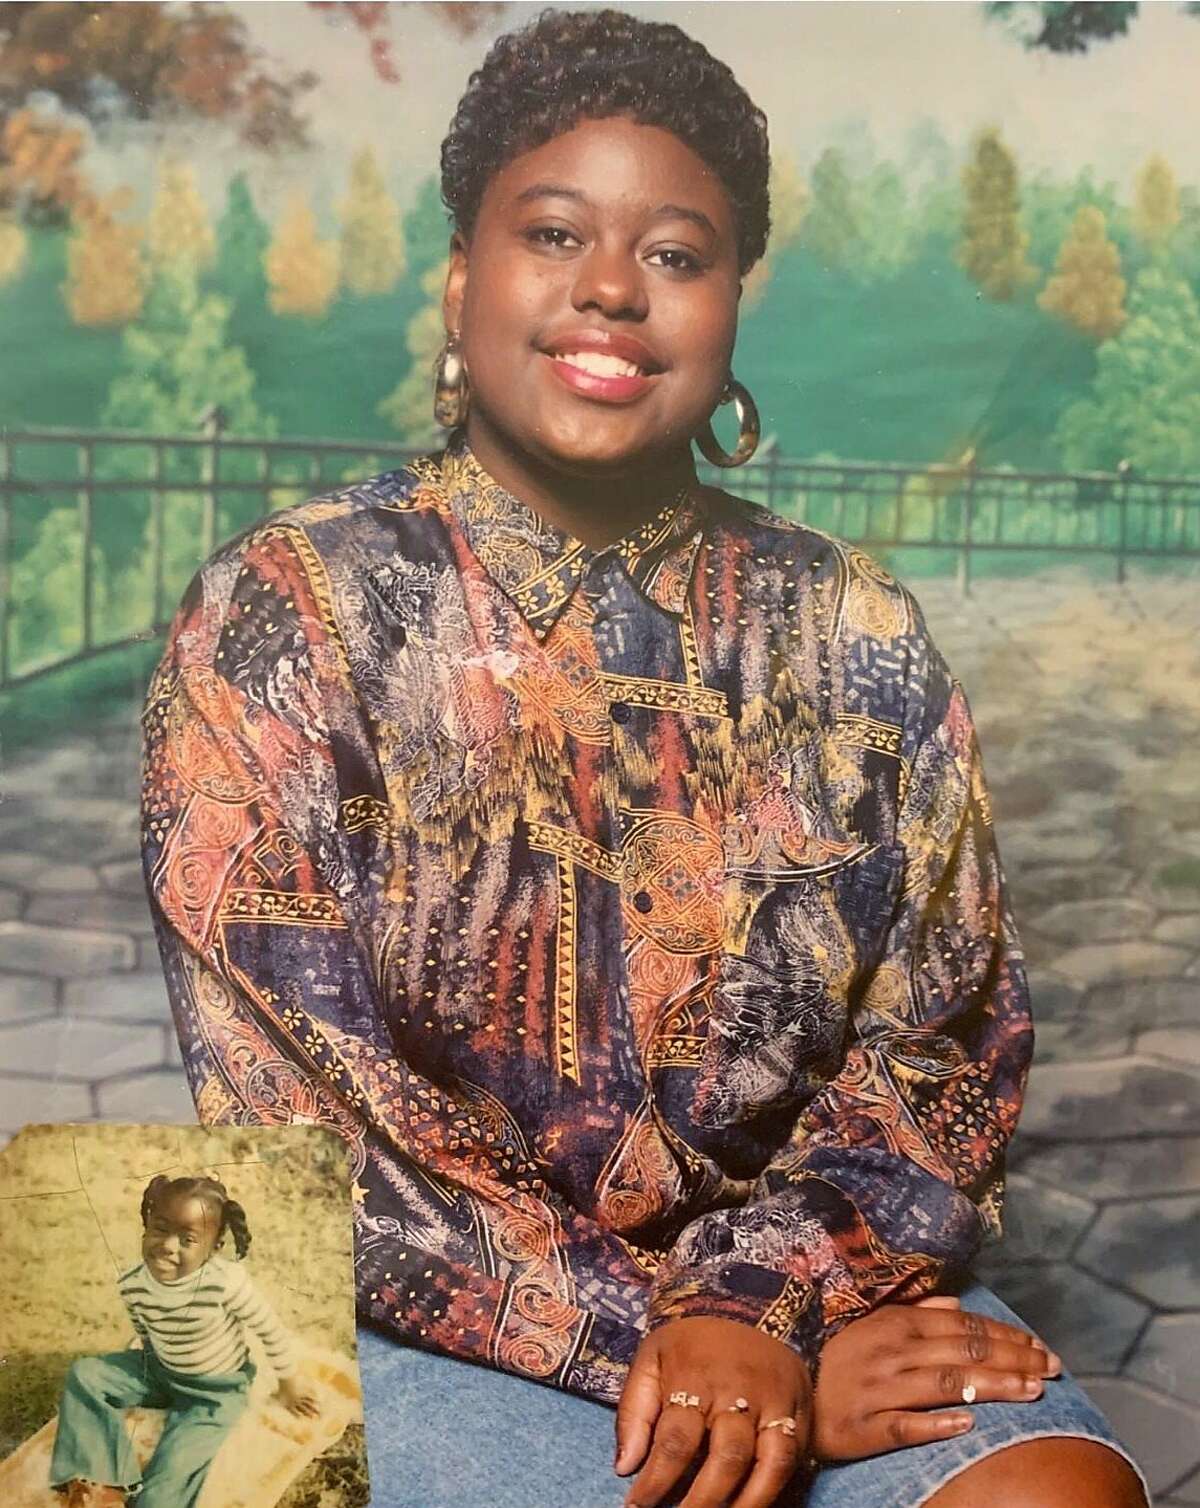 Pamela Turner was fatally shot by a Baytown Police Department officer on Monday, May 13, 2019.